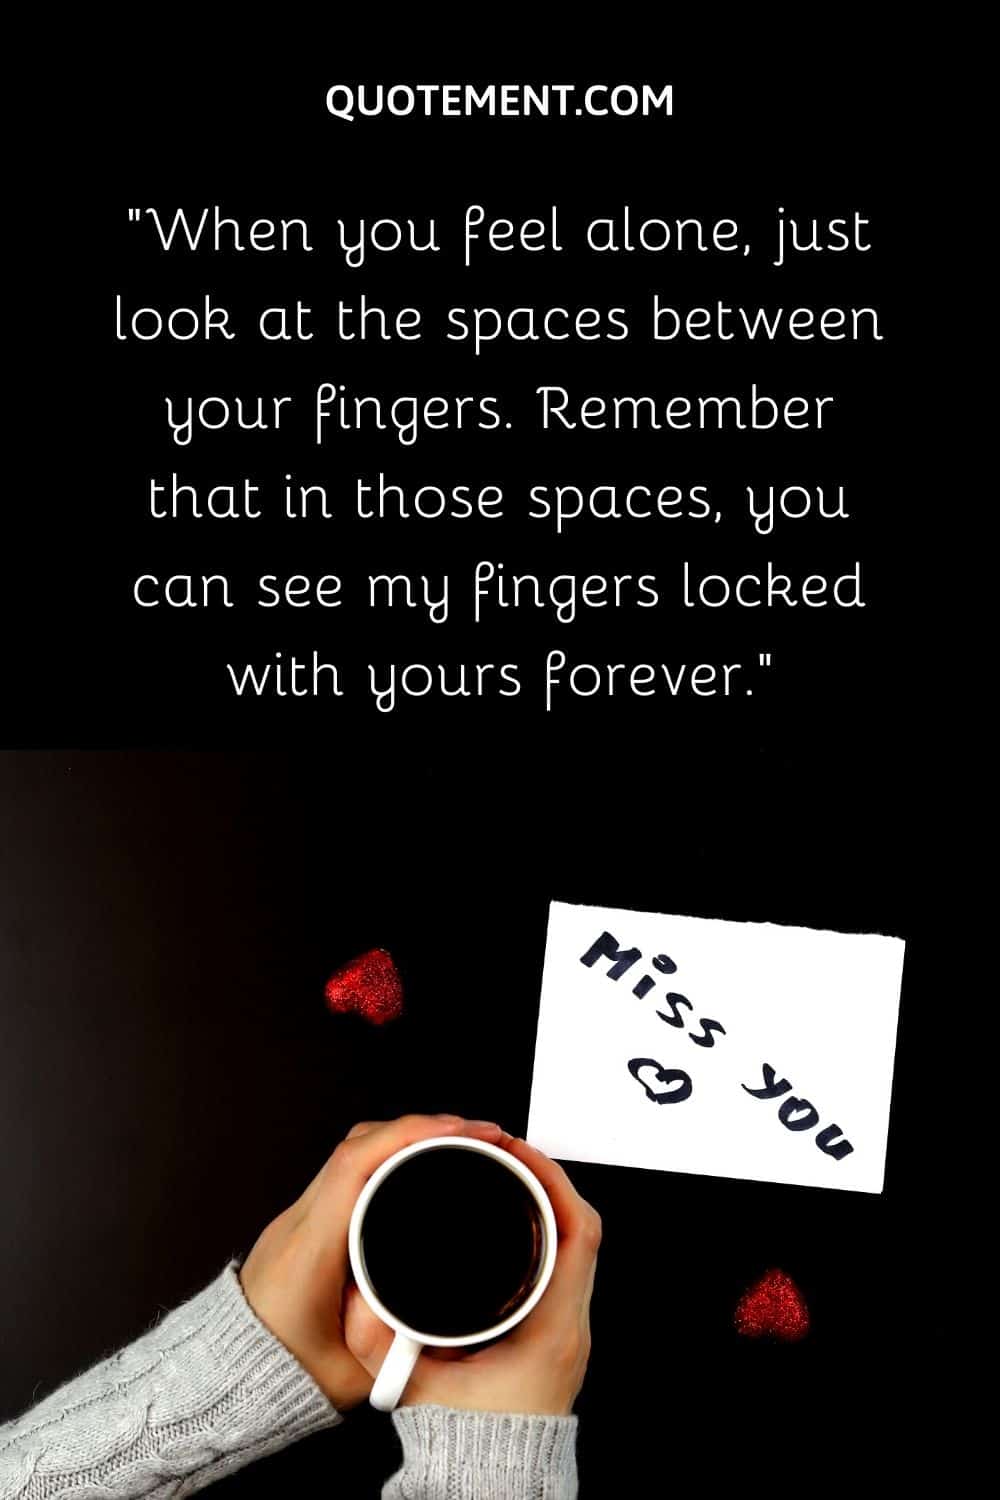 When you feel alone, just look at the spaces between your fingers.